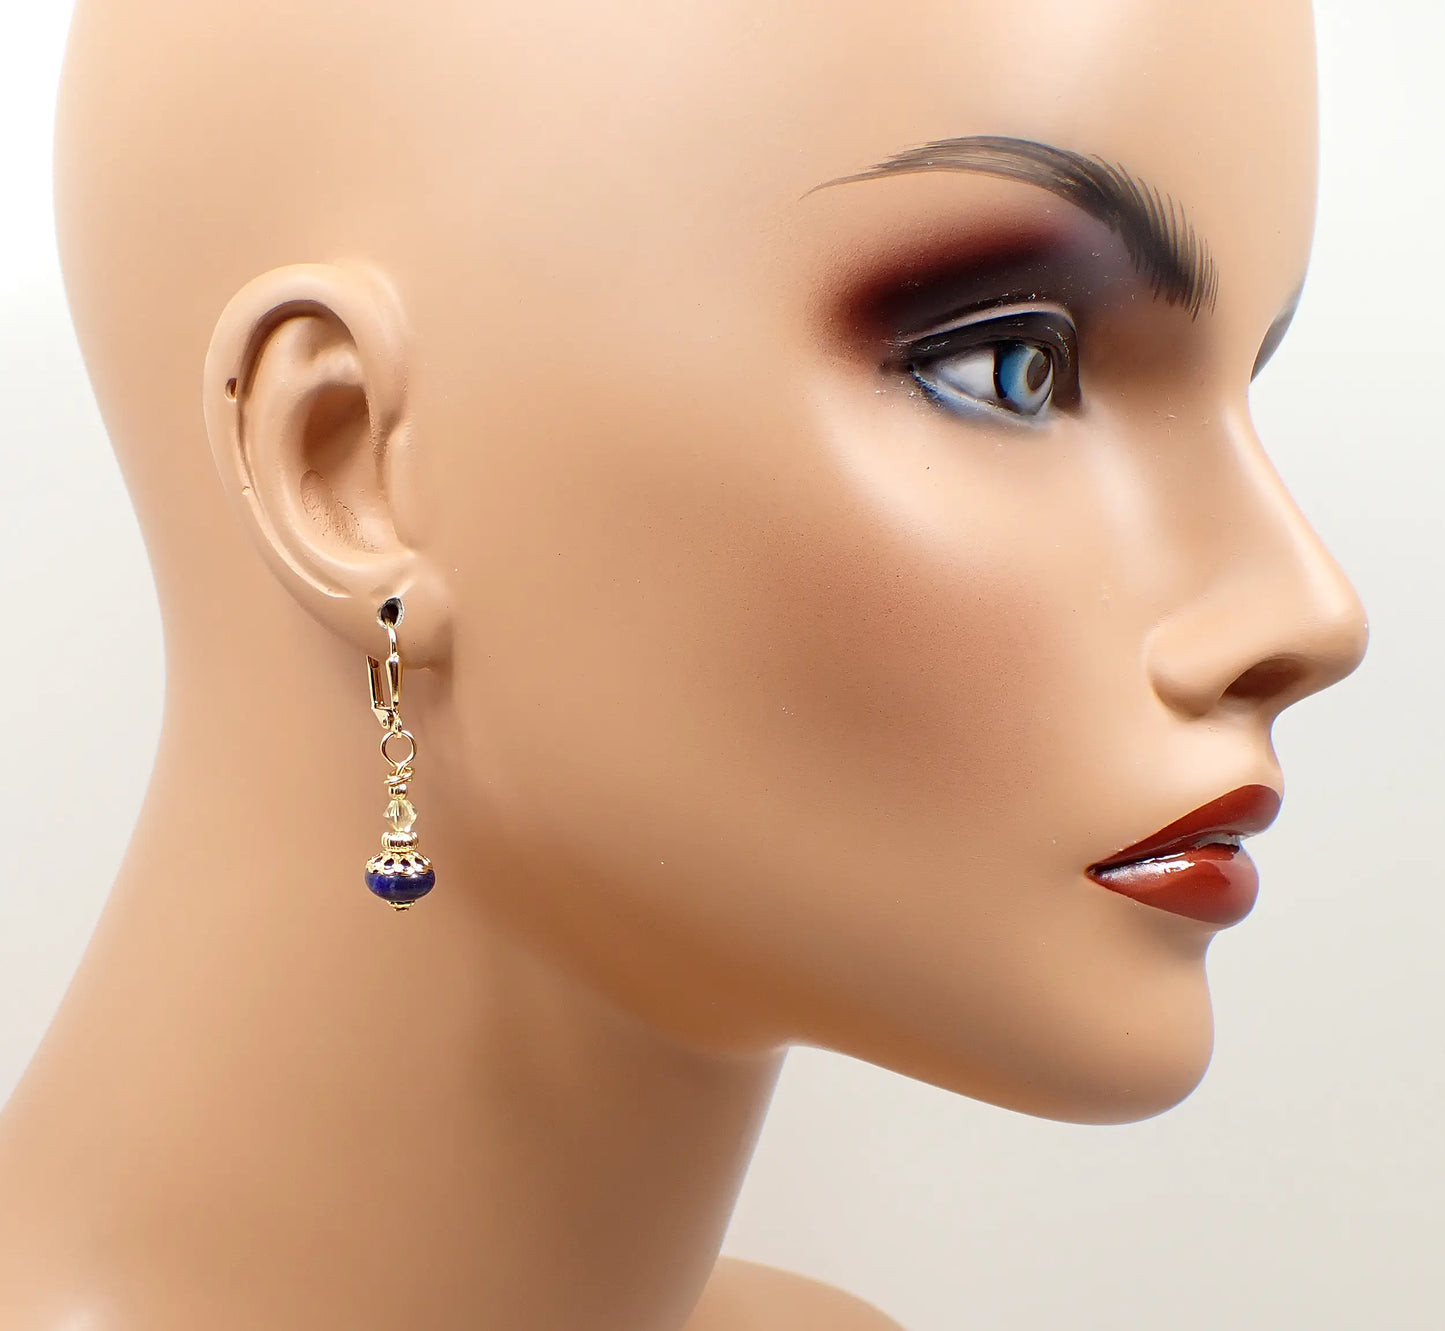 Small Blue Lapis Lazuli Gemstone Handmade Drop Earrings, Gold Plated, Hook Lever Back or Clip On